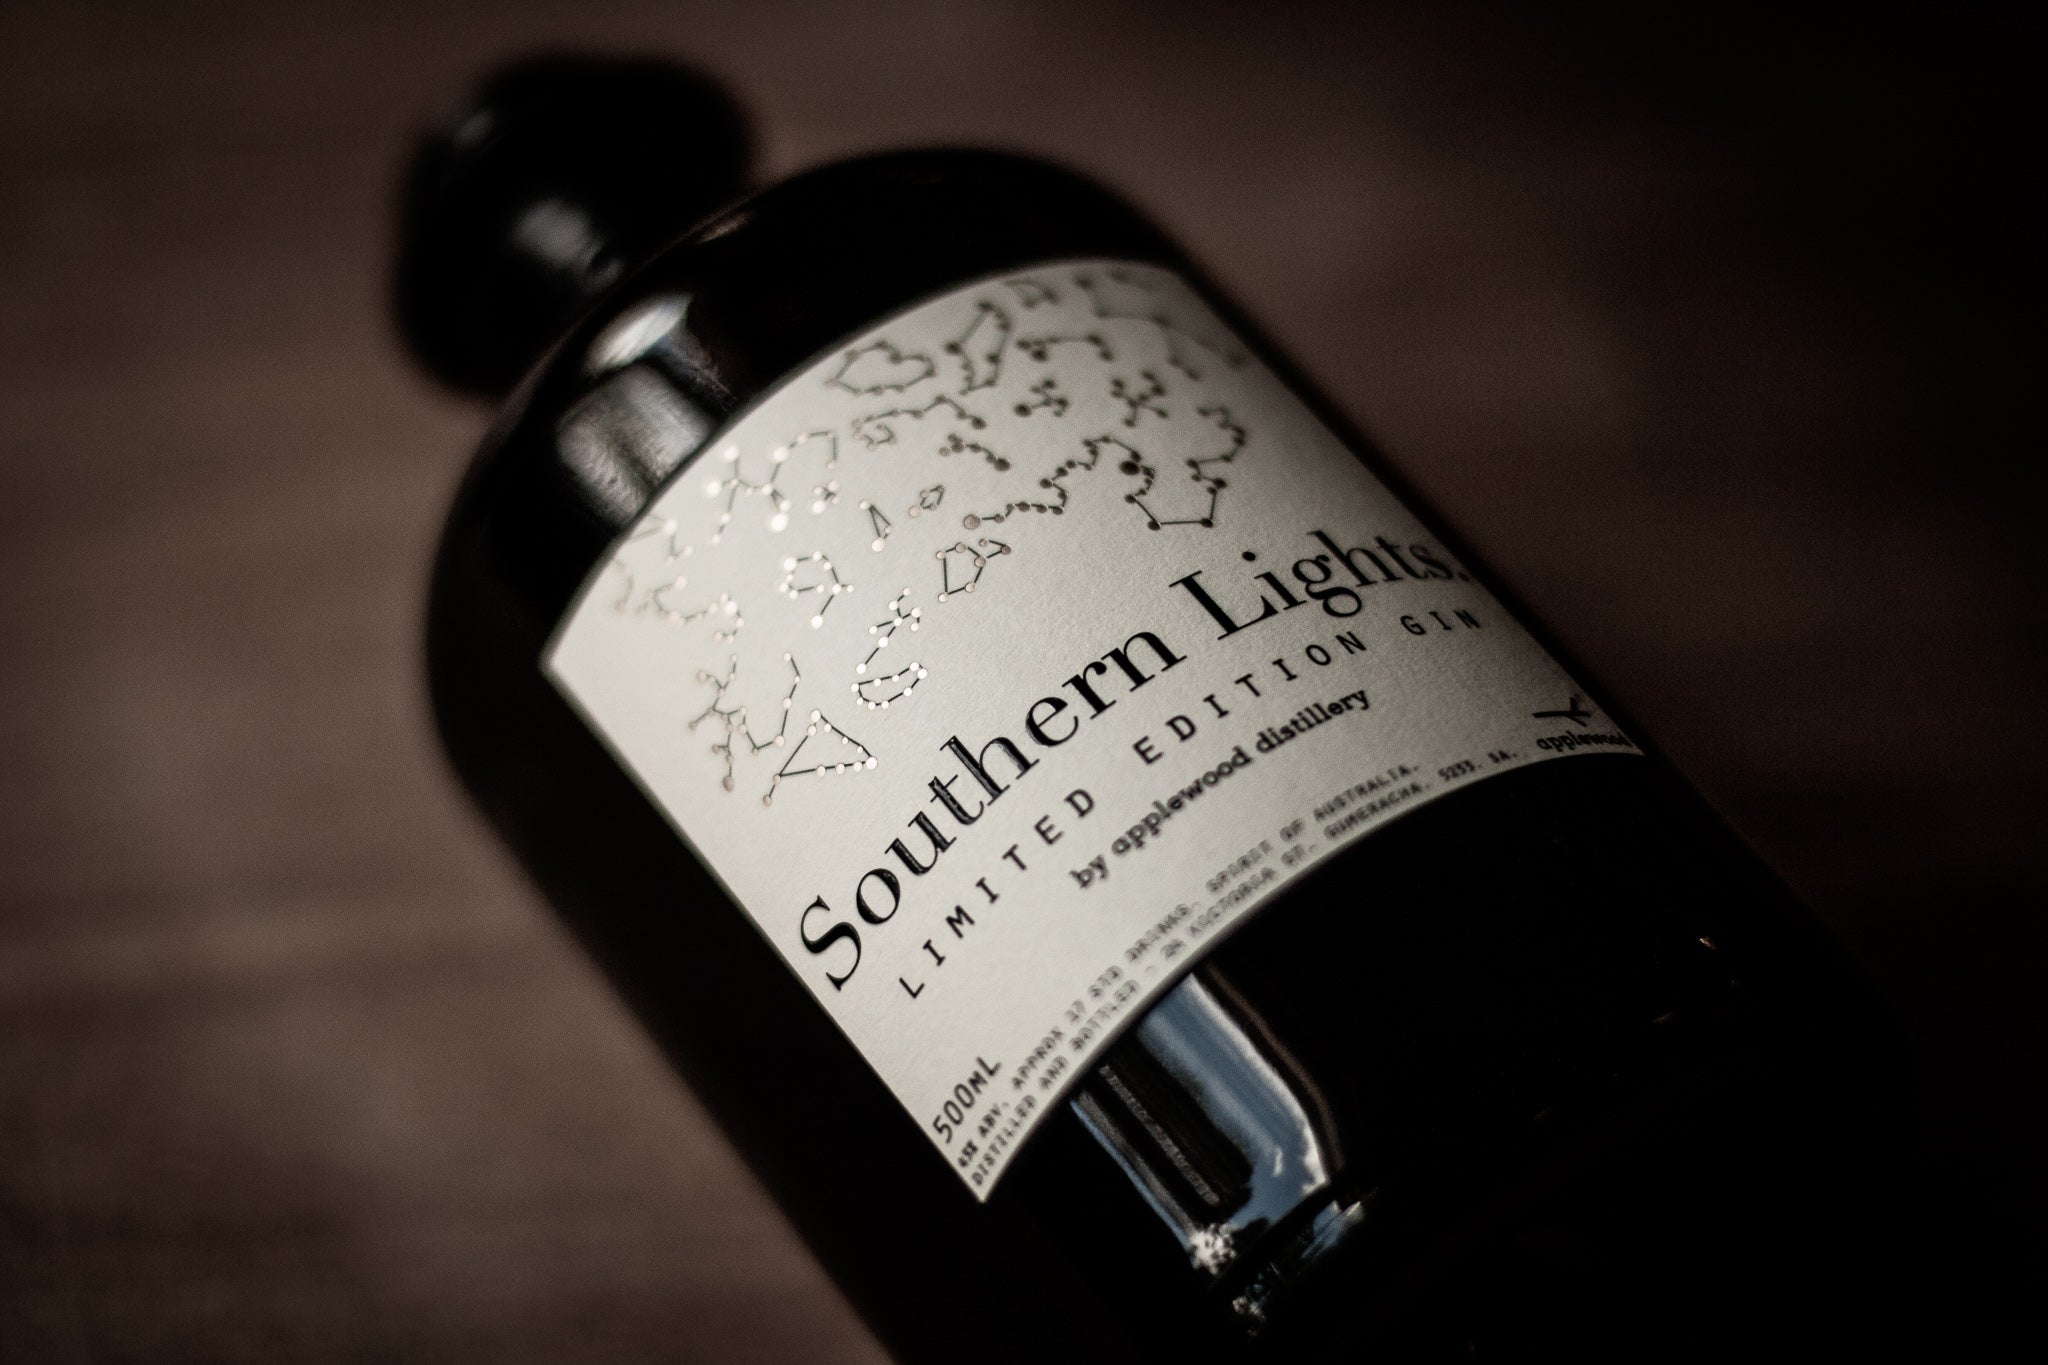 southern lights gin - Applewood Distillery